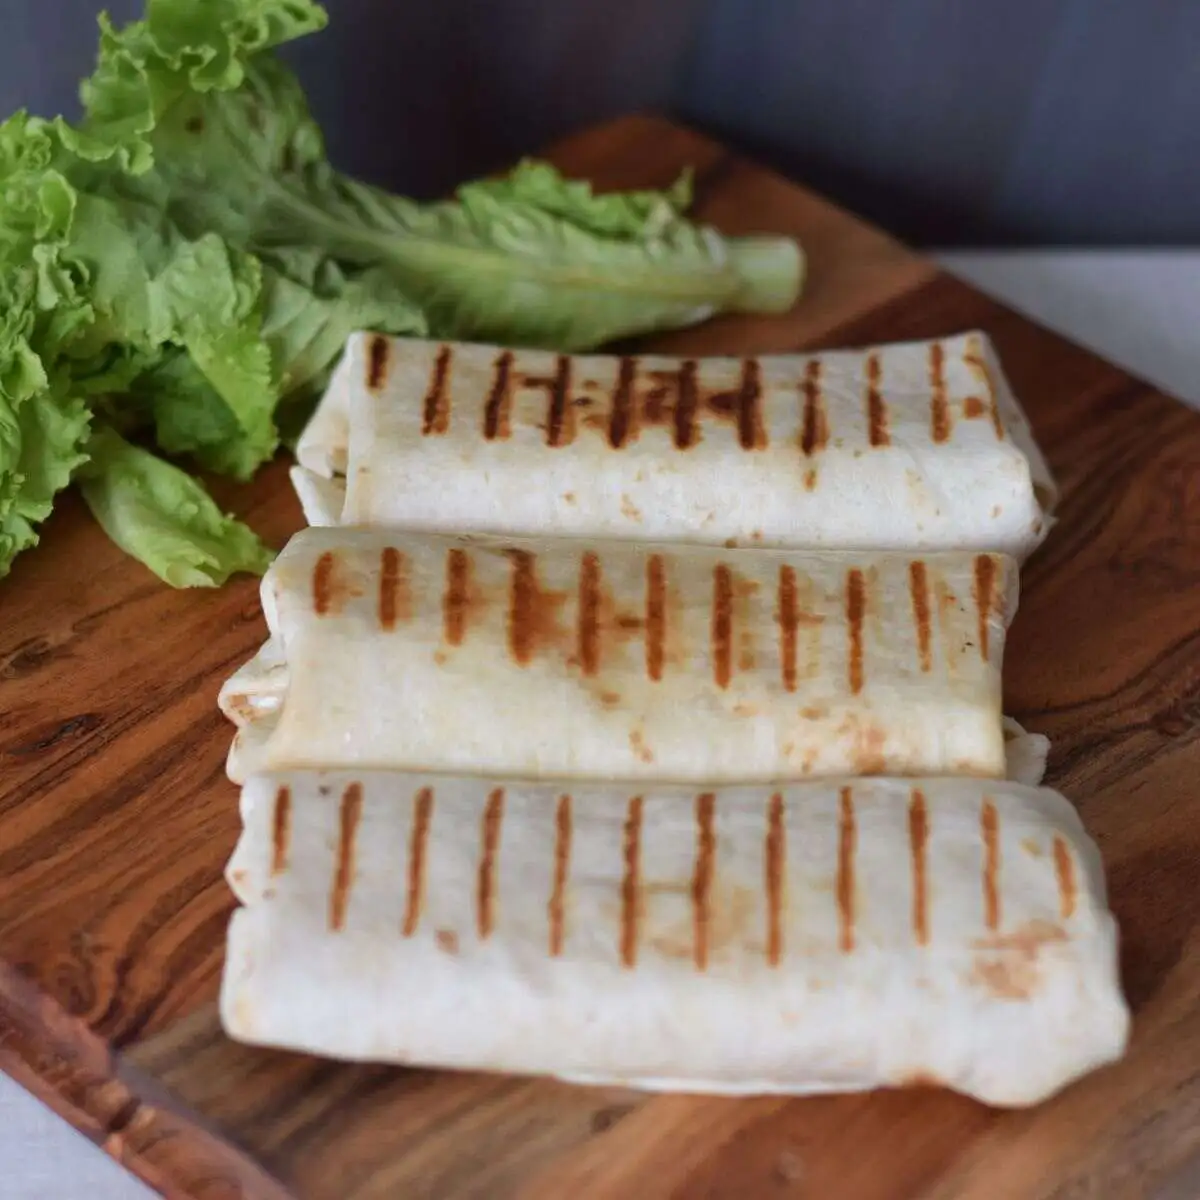 Grilled Chicken Wraps served on a wooden board